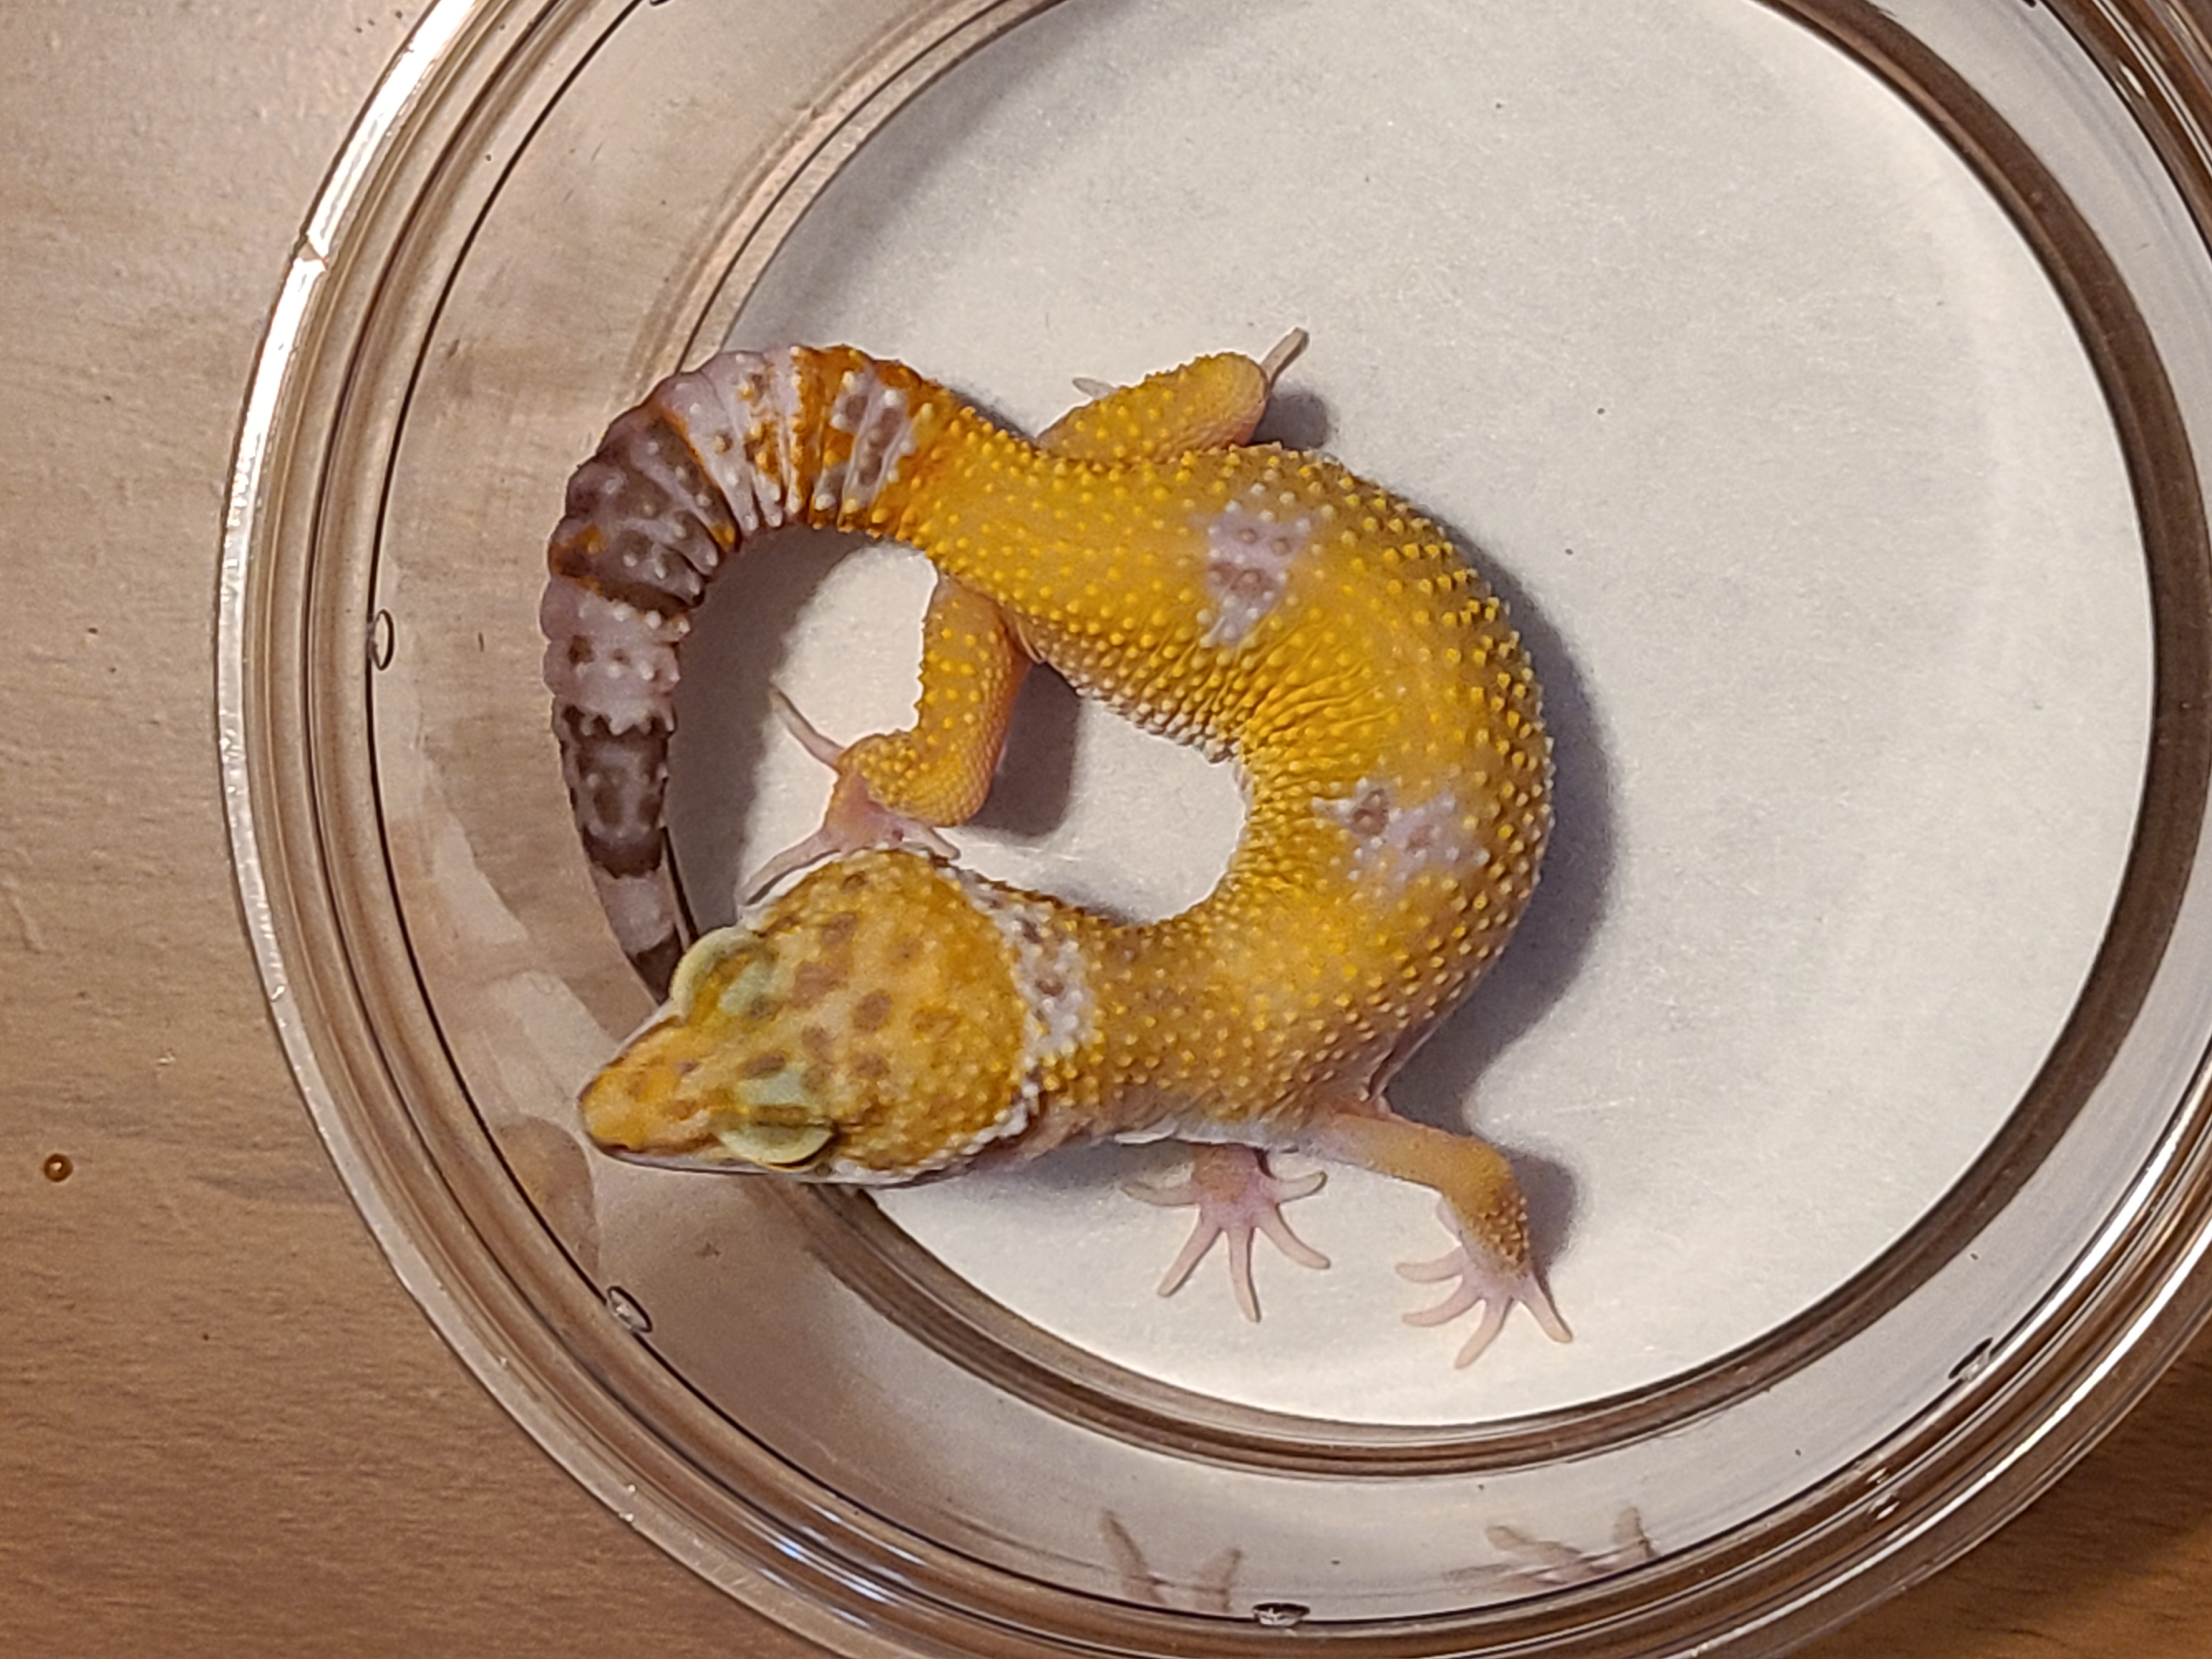 Bell Albino Leopard Gecko by The Reptile Company of Wisconsin